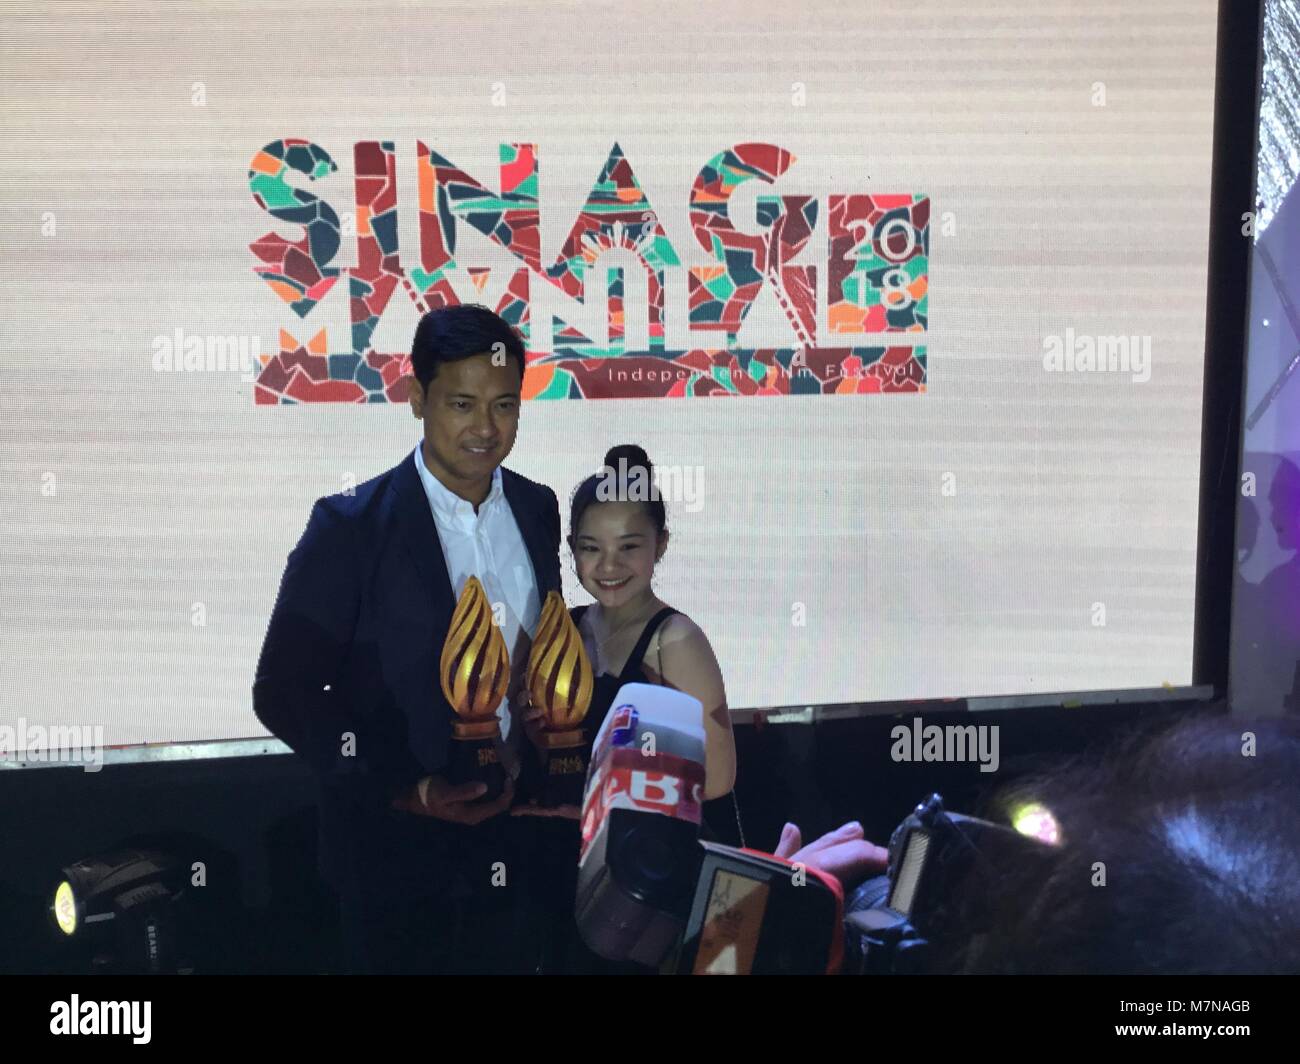 The 4th Sinag Maynila Independent Film Festival concluded at Conrad Hotel in Pasay City with the awarding of the winners in different categories: BEST SHORT FILM: The Duwende by Odin Fernandez BEST DOCUMENTARY: (Mahal, 2017) by Janine Patricia Santos JURY AWARD (DOCUMENTARY): Journeyman Finds Home: The Simone Rota Story by Albert Almendralejo, Maricel Cariaga BEST SOUND: Mikko Quizon for Abomination BEST MUSIC: Fergus Cronkite for Melody/Random/Melbourne! BEST PRODUCTION DESIGN: El Peste BEST EDITING: Diego Marx Robles for Tale of the Lost Boys BEST CINEMATOGRAPHY: Pipo Domagas for Bomba (The Stock Photo